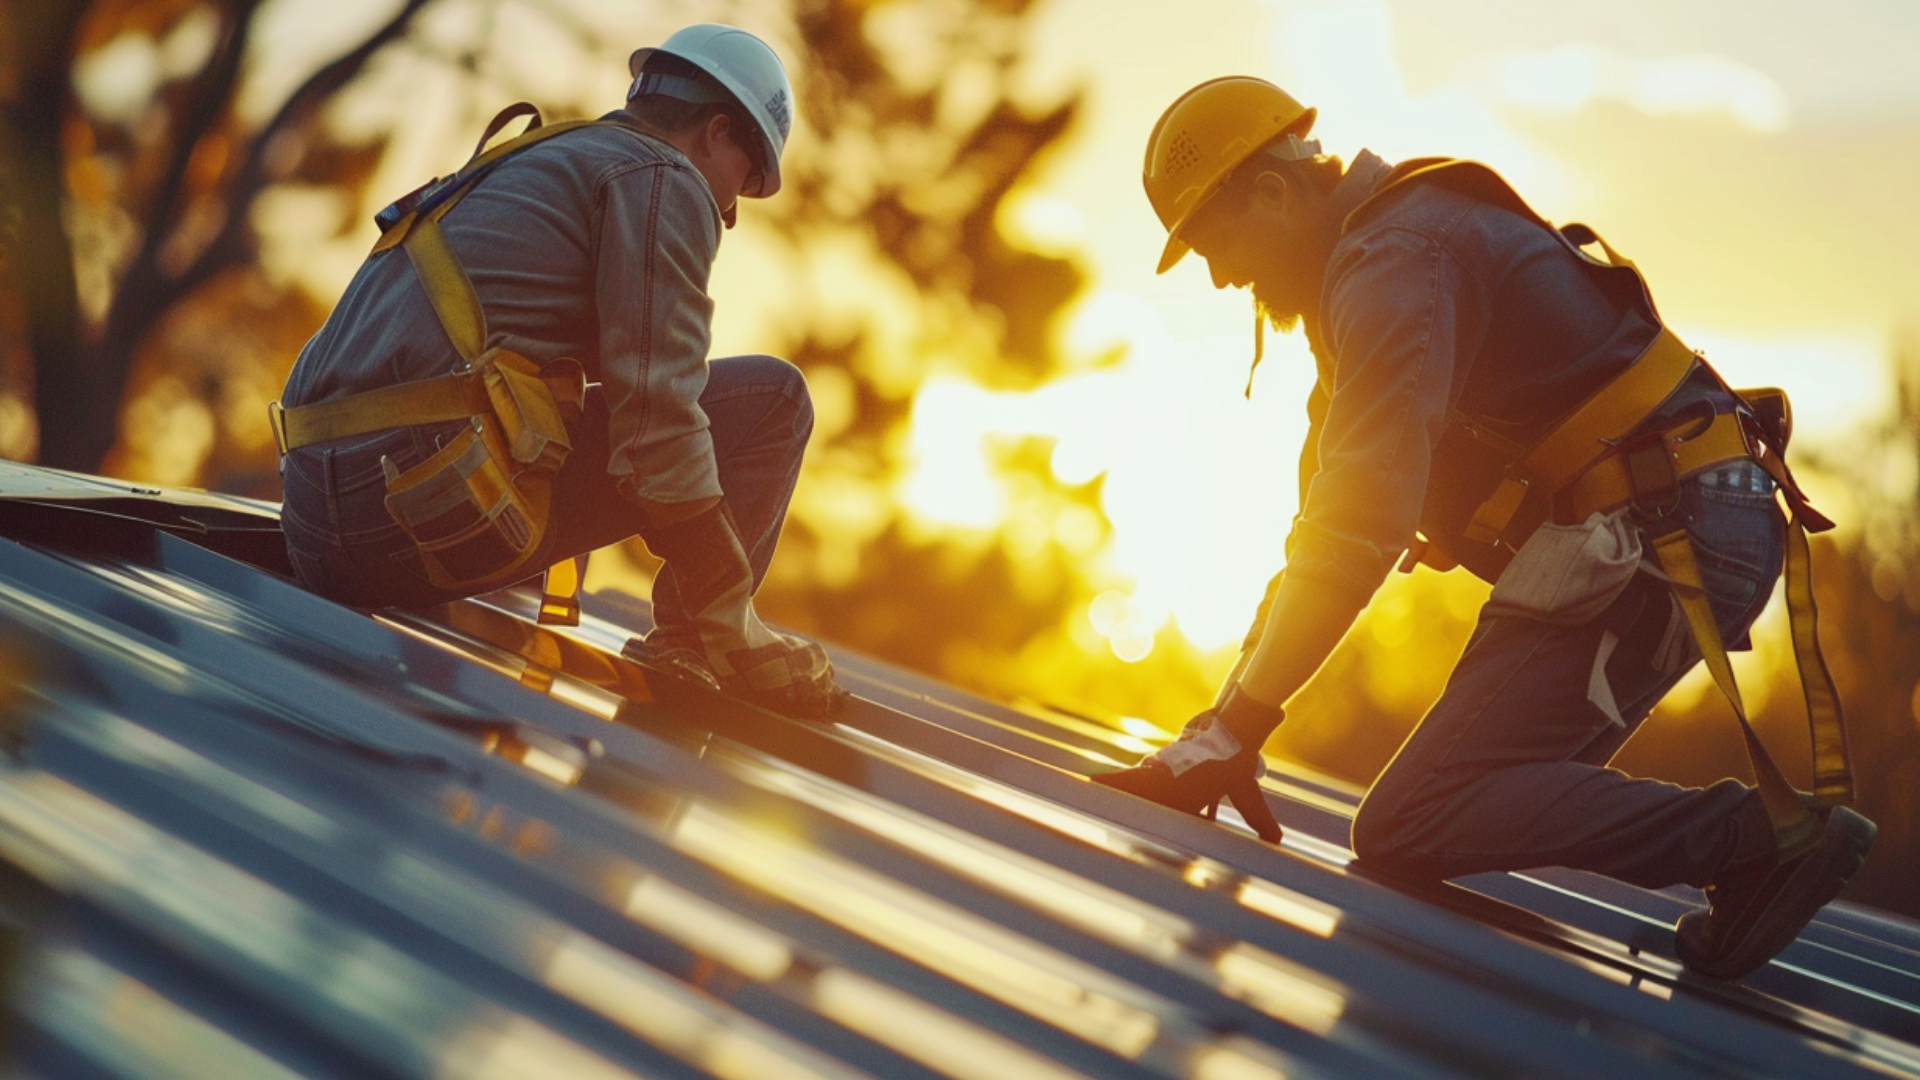 A photograph of two sheet metal workers, wearing safety gear, actively installing a metal roof